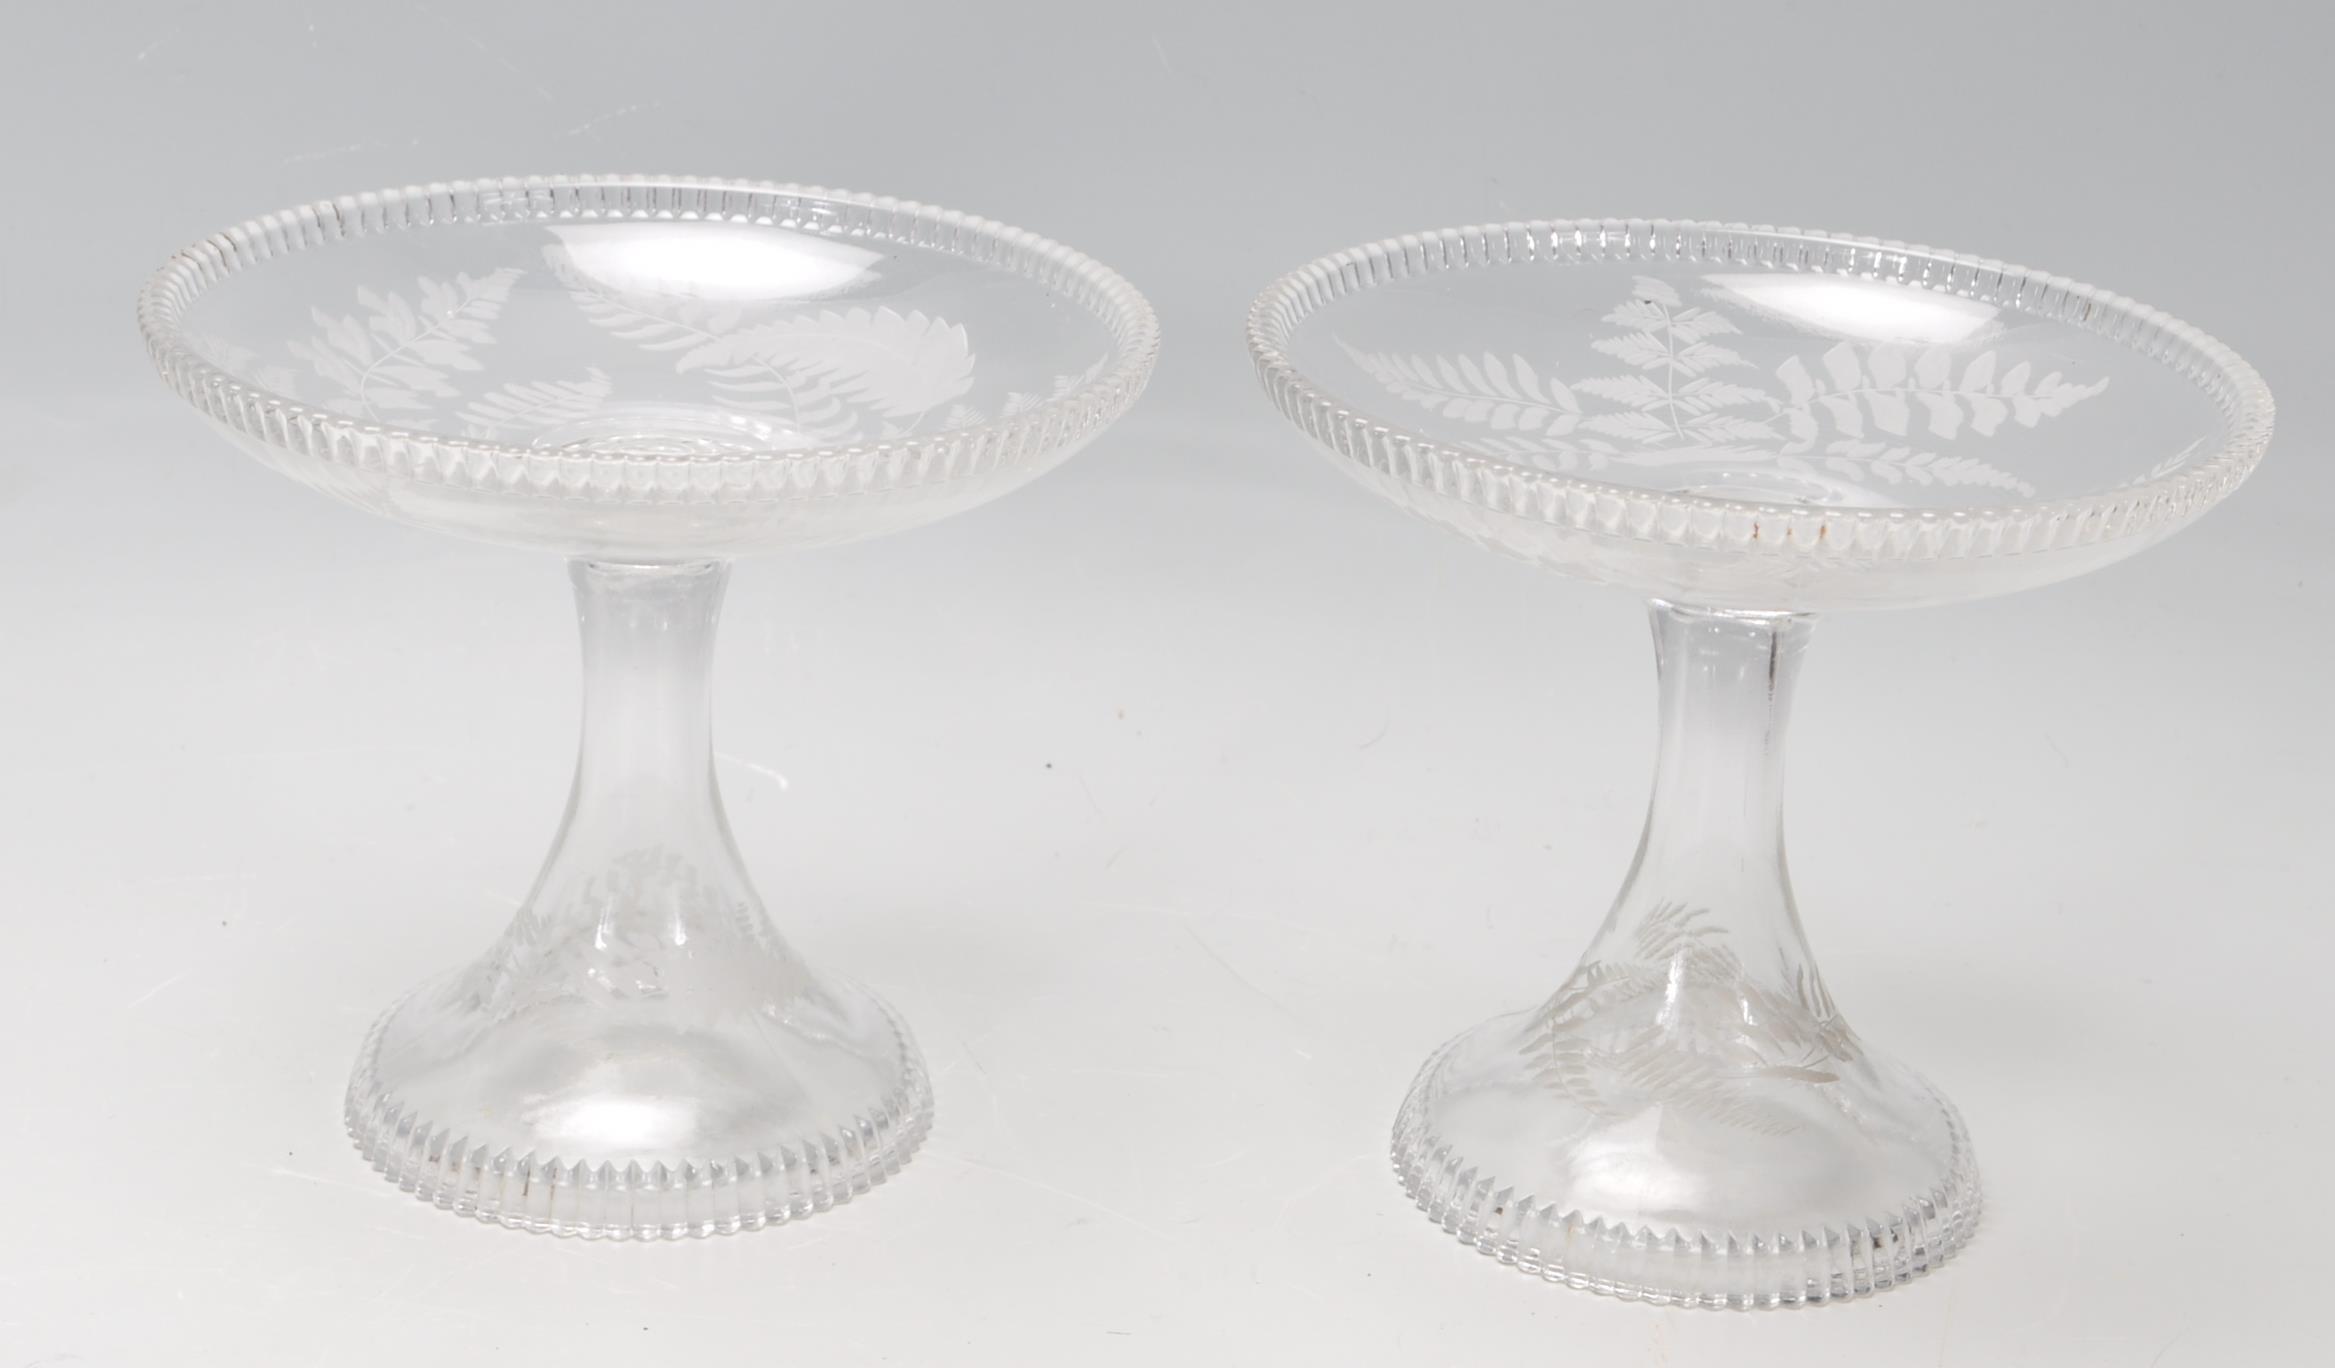 PAIR OF ANTIQUE VICTORIAN GLASS SWEET